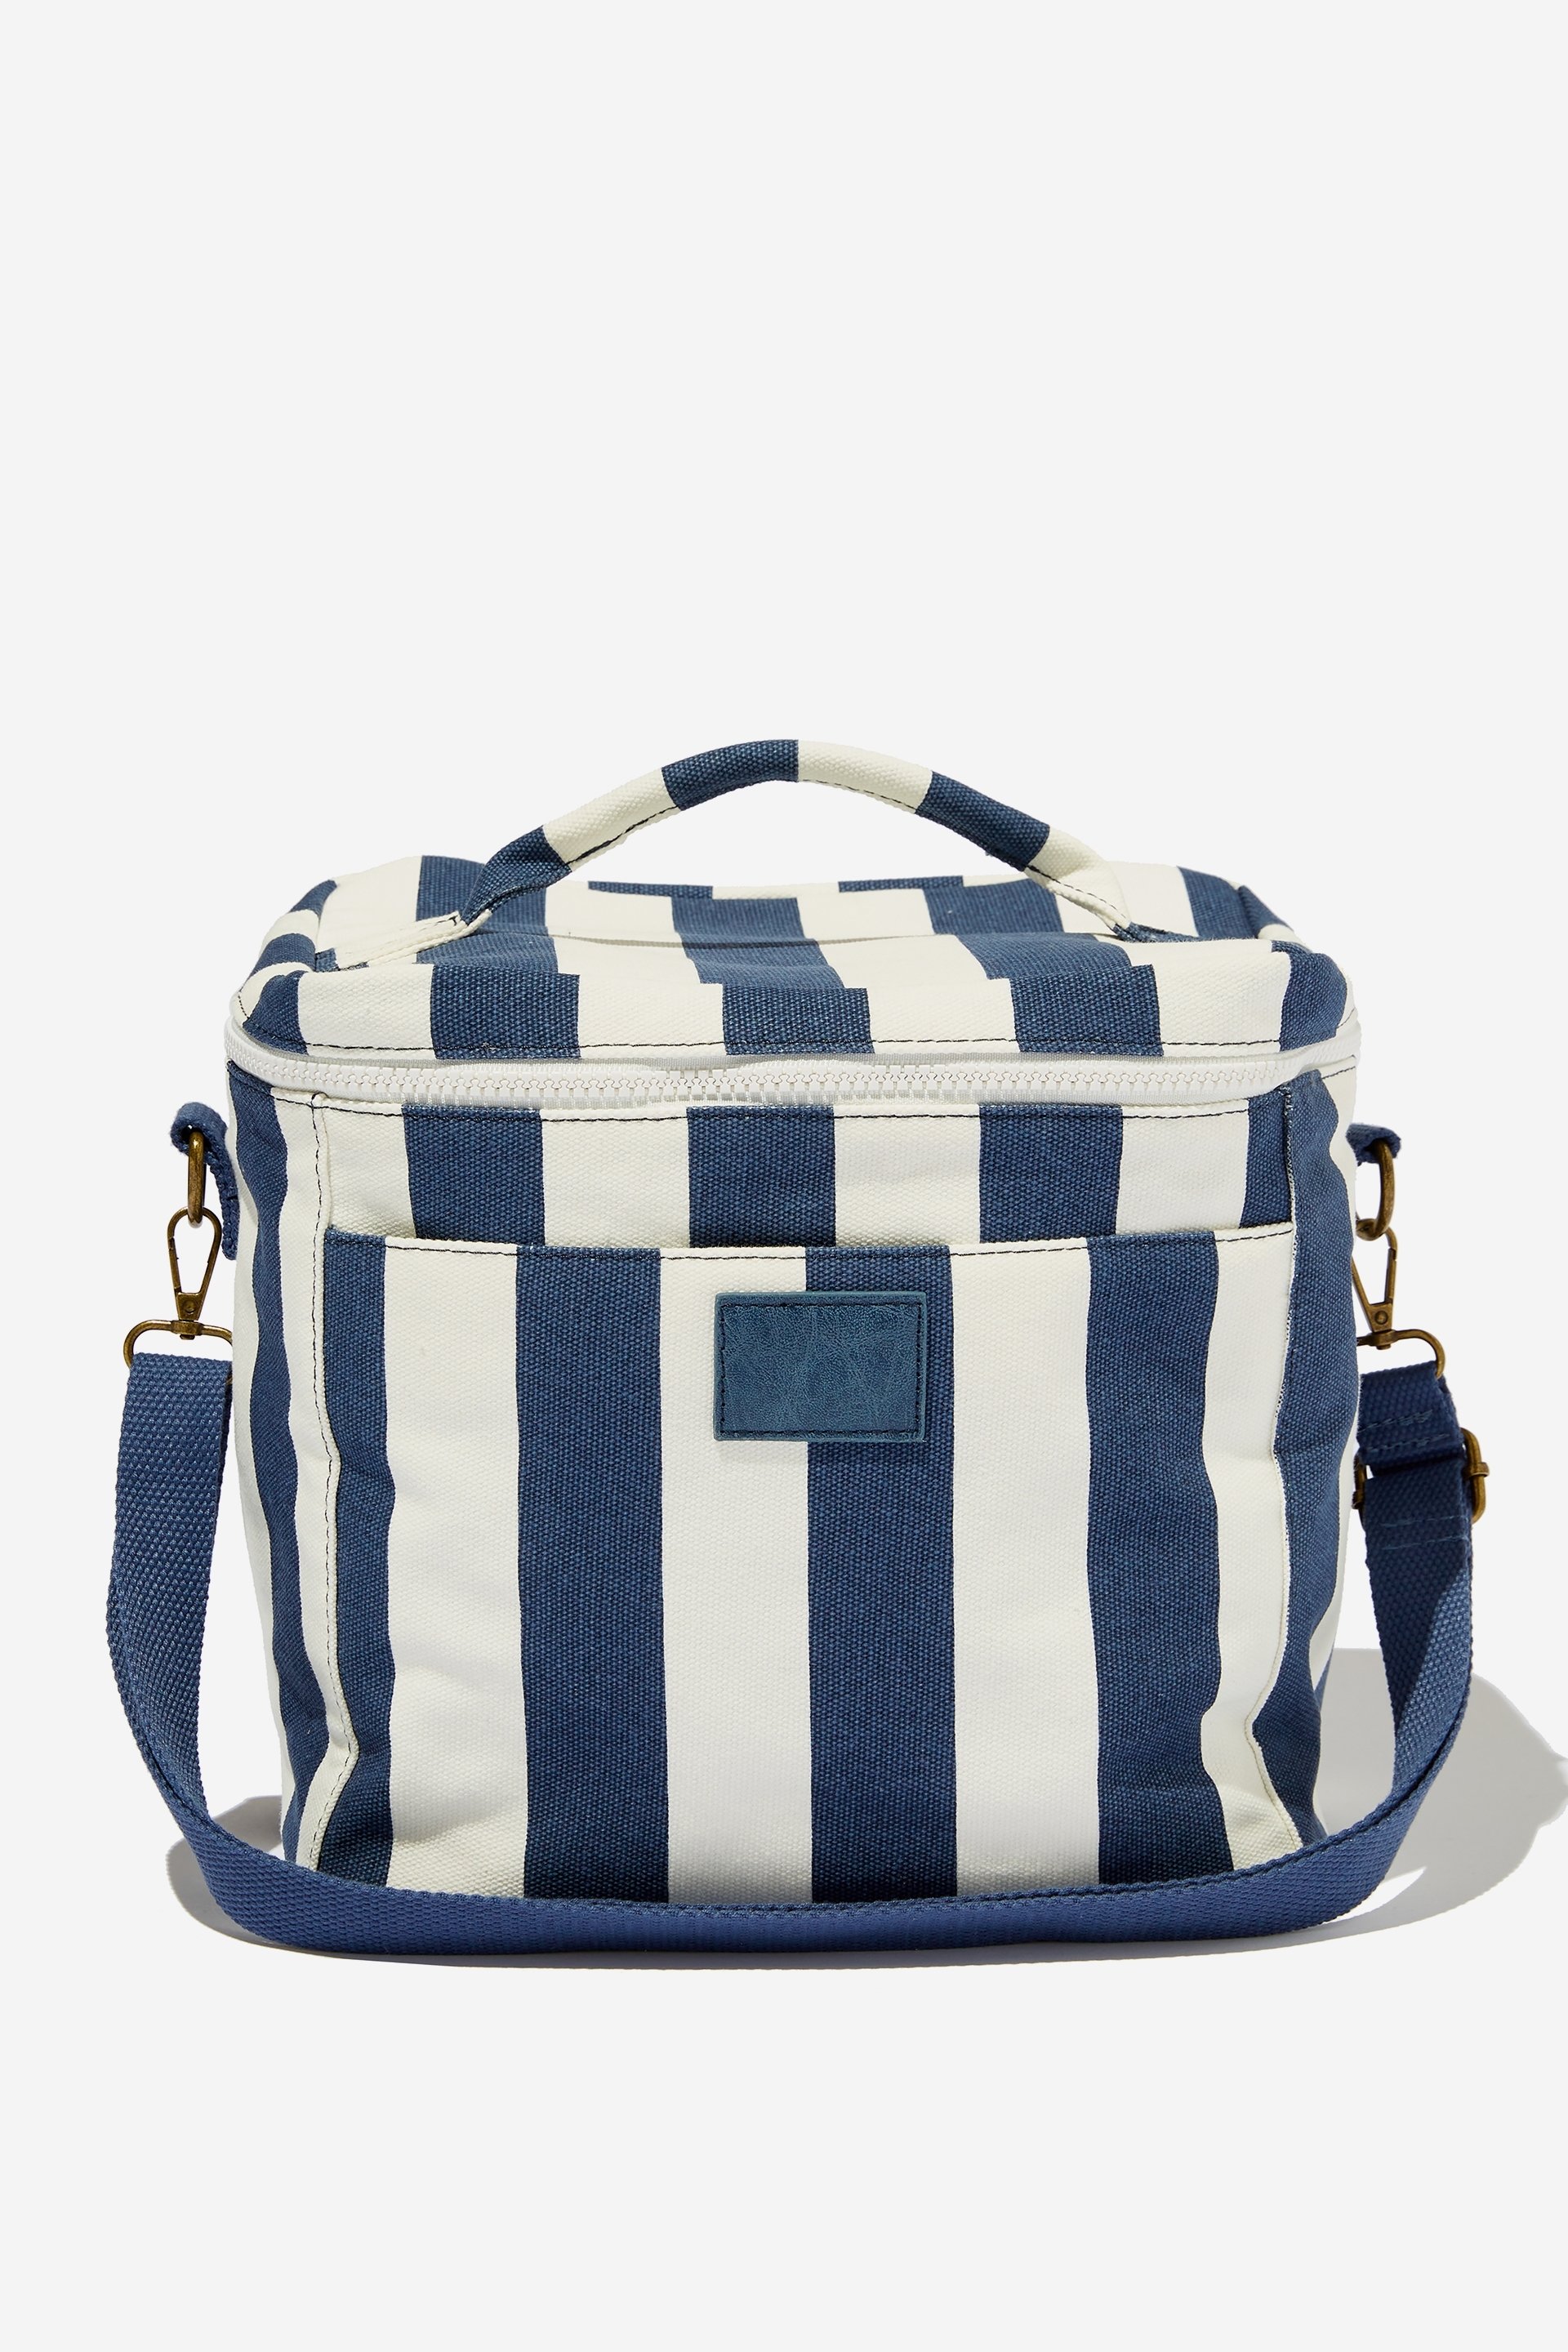 Cotton On Men - Insulated Cooler Bag - Navy/white bold stripe